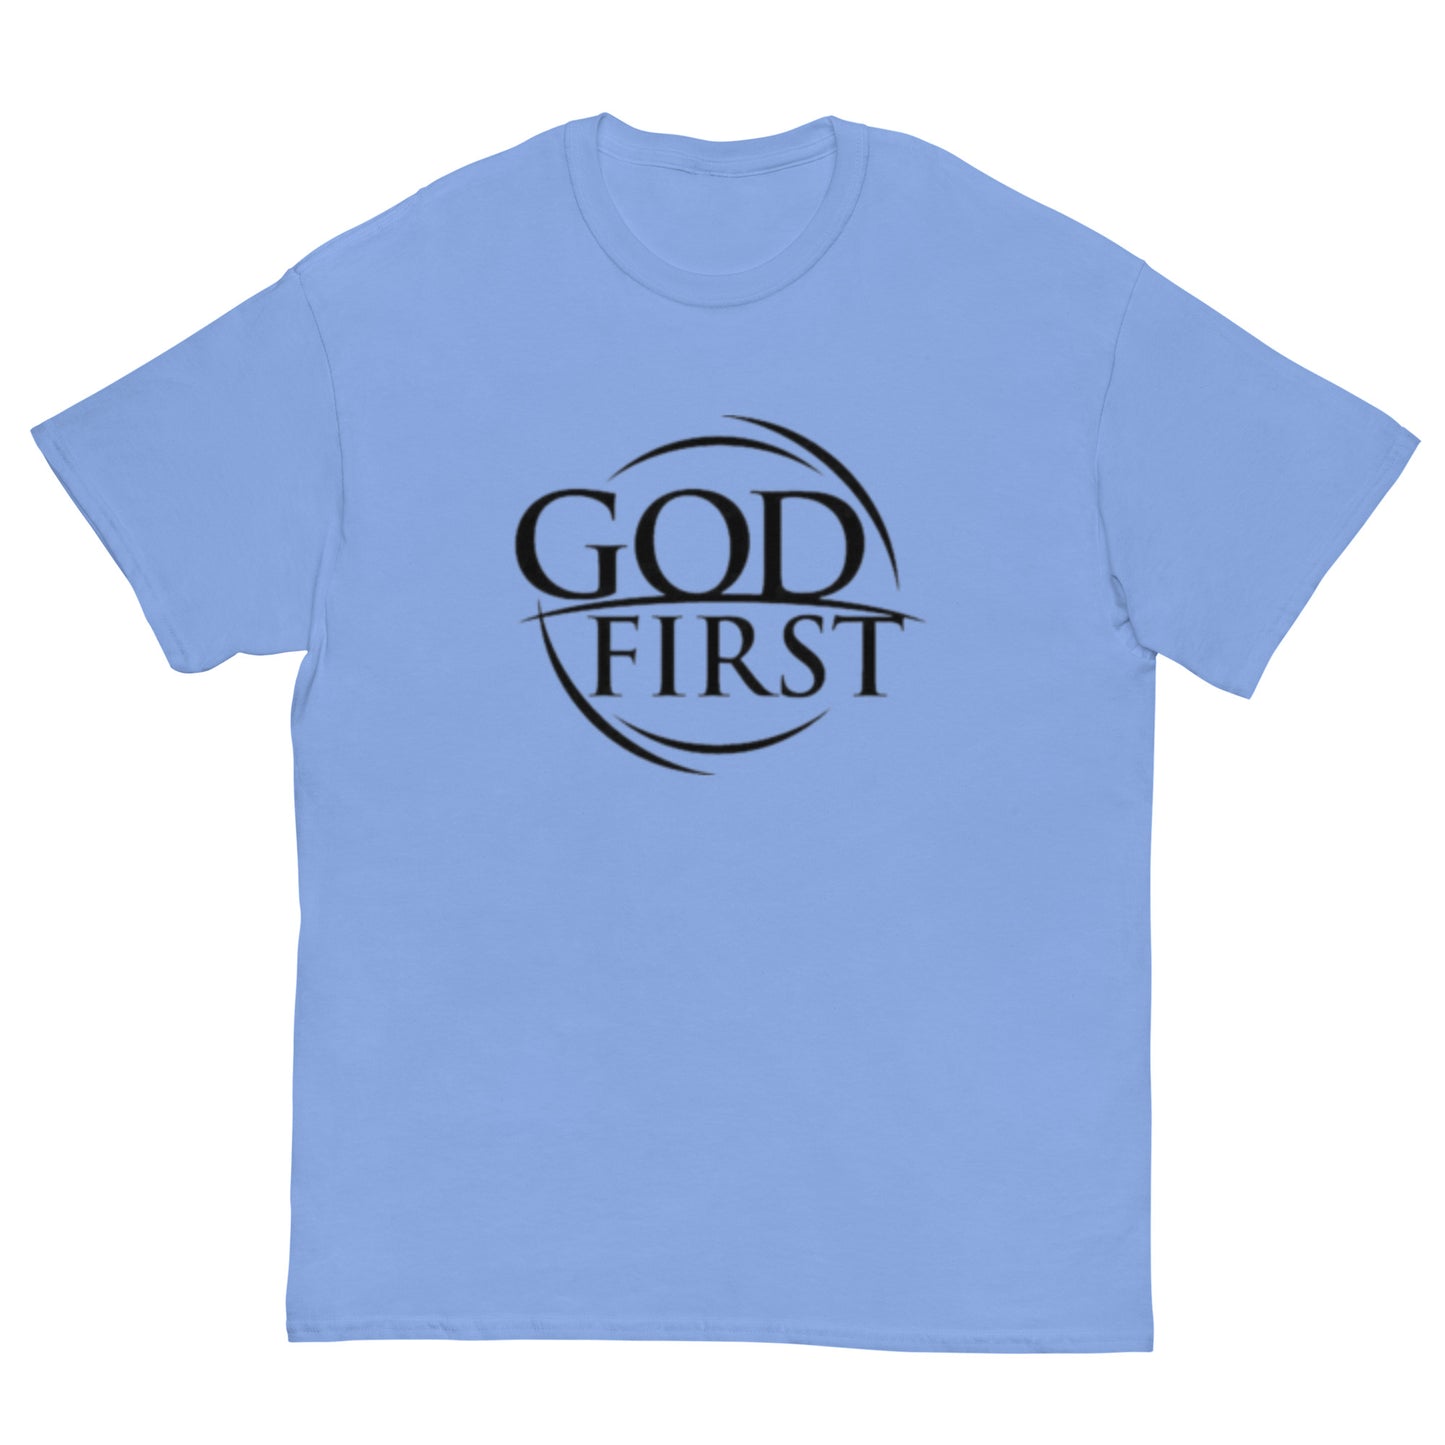 God First - classic tee